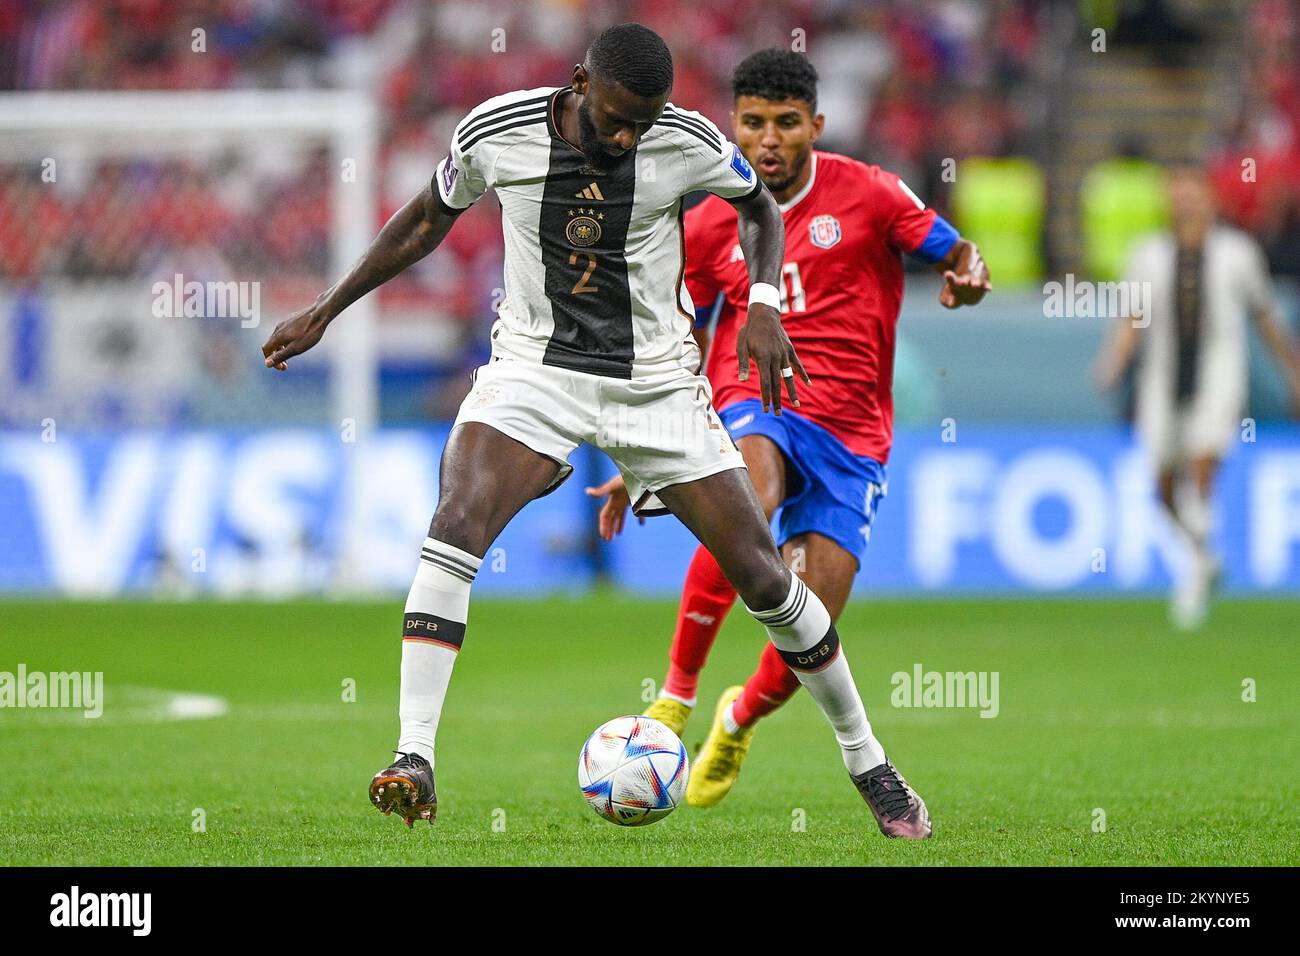 AL KHOR, QATAR - DECEMBER 1: Antonio Ruediger of Germany during the Group E - FIFA World Cup Qatar 2022 match between Costa Rica and Germany at the Al Bayt Stadium on December 1, 2022 in Al Khor, Qatar (Photo by Pablo Morano/BSR Agency) Stock Photo